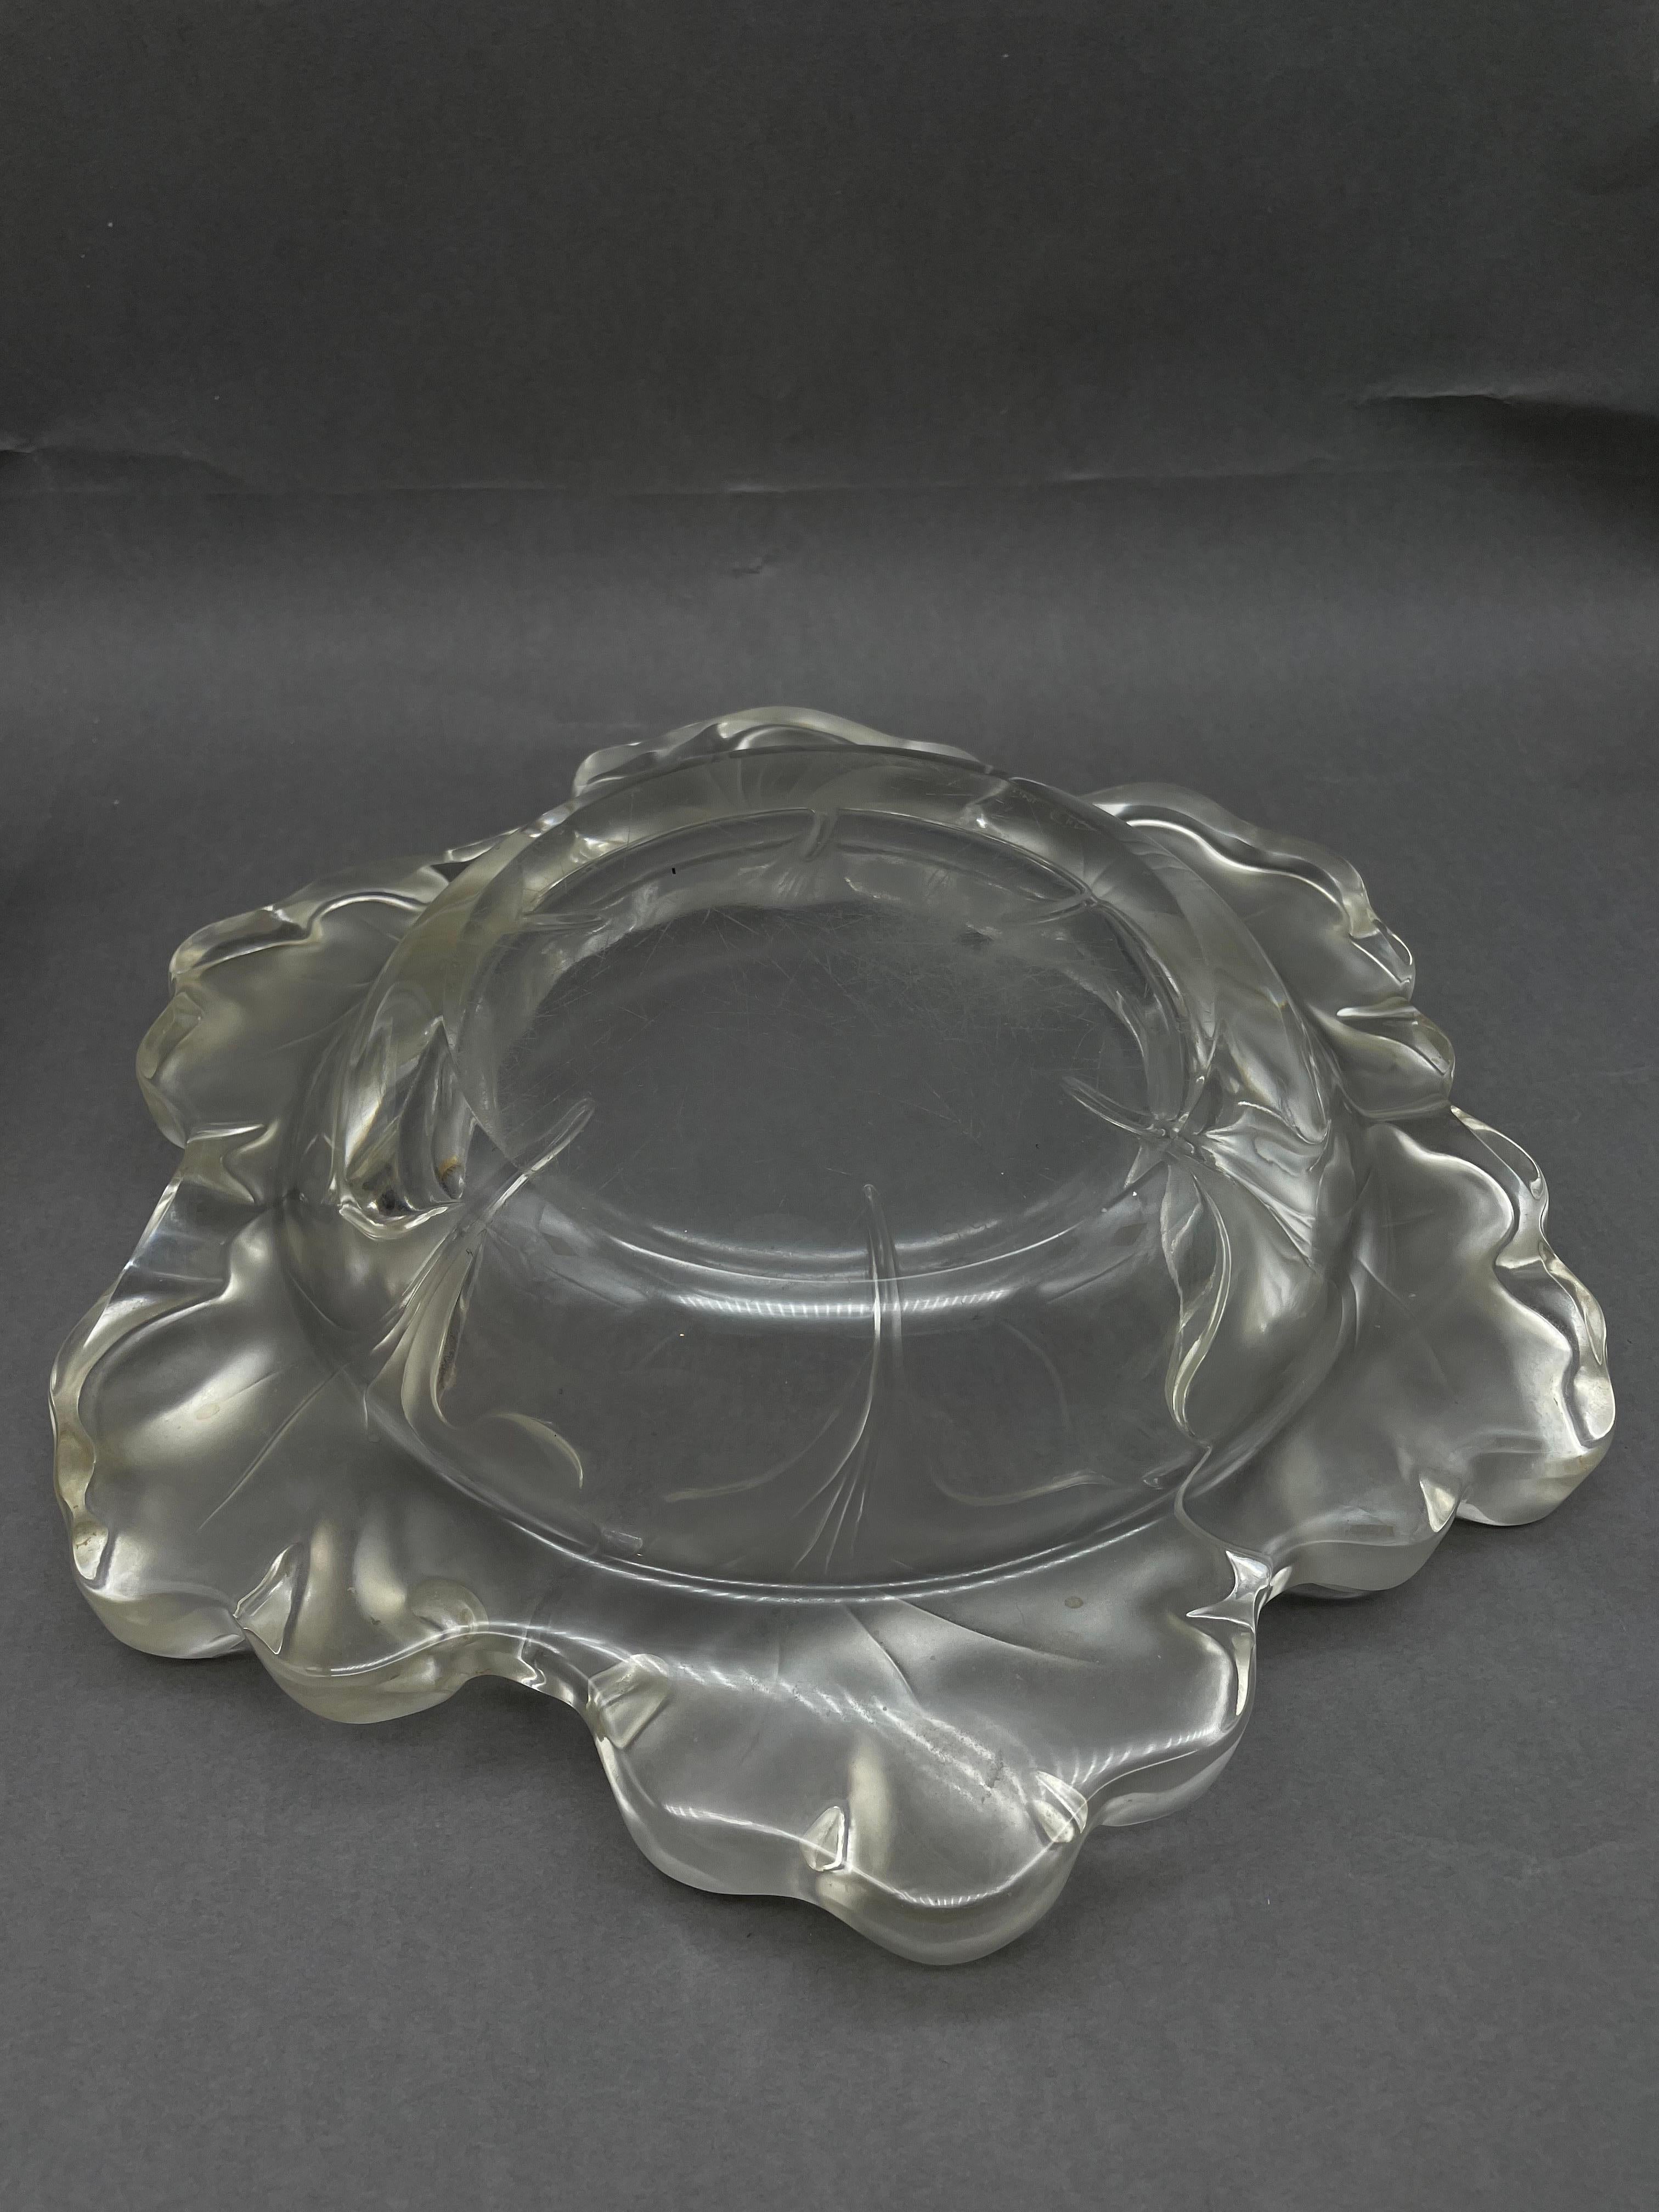 Rare large Lalique crystal leaf bowl

Solid worked crystal, cut and shaped into a leaf shape. Extremely detailed design. Very rare and of high quality.

Lalique Made in France.